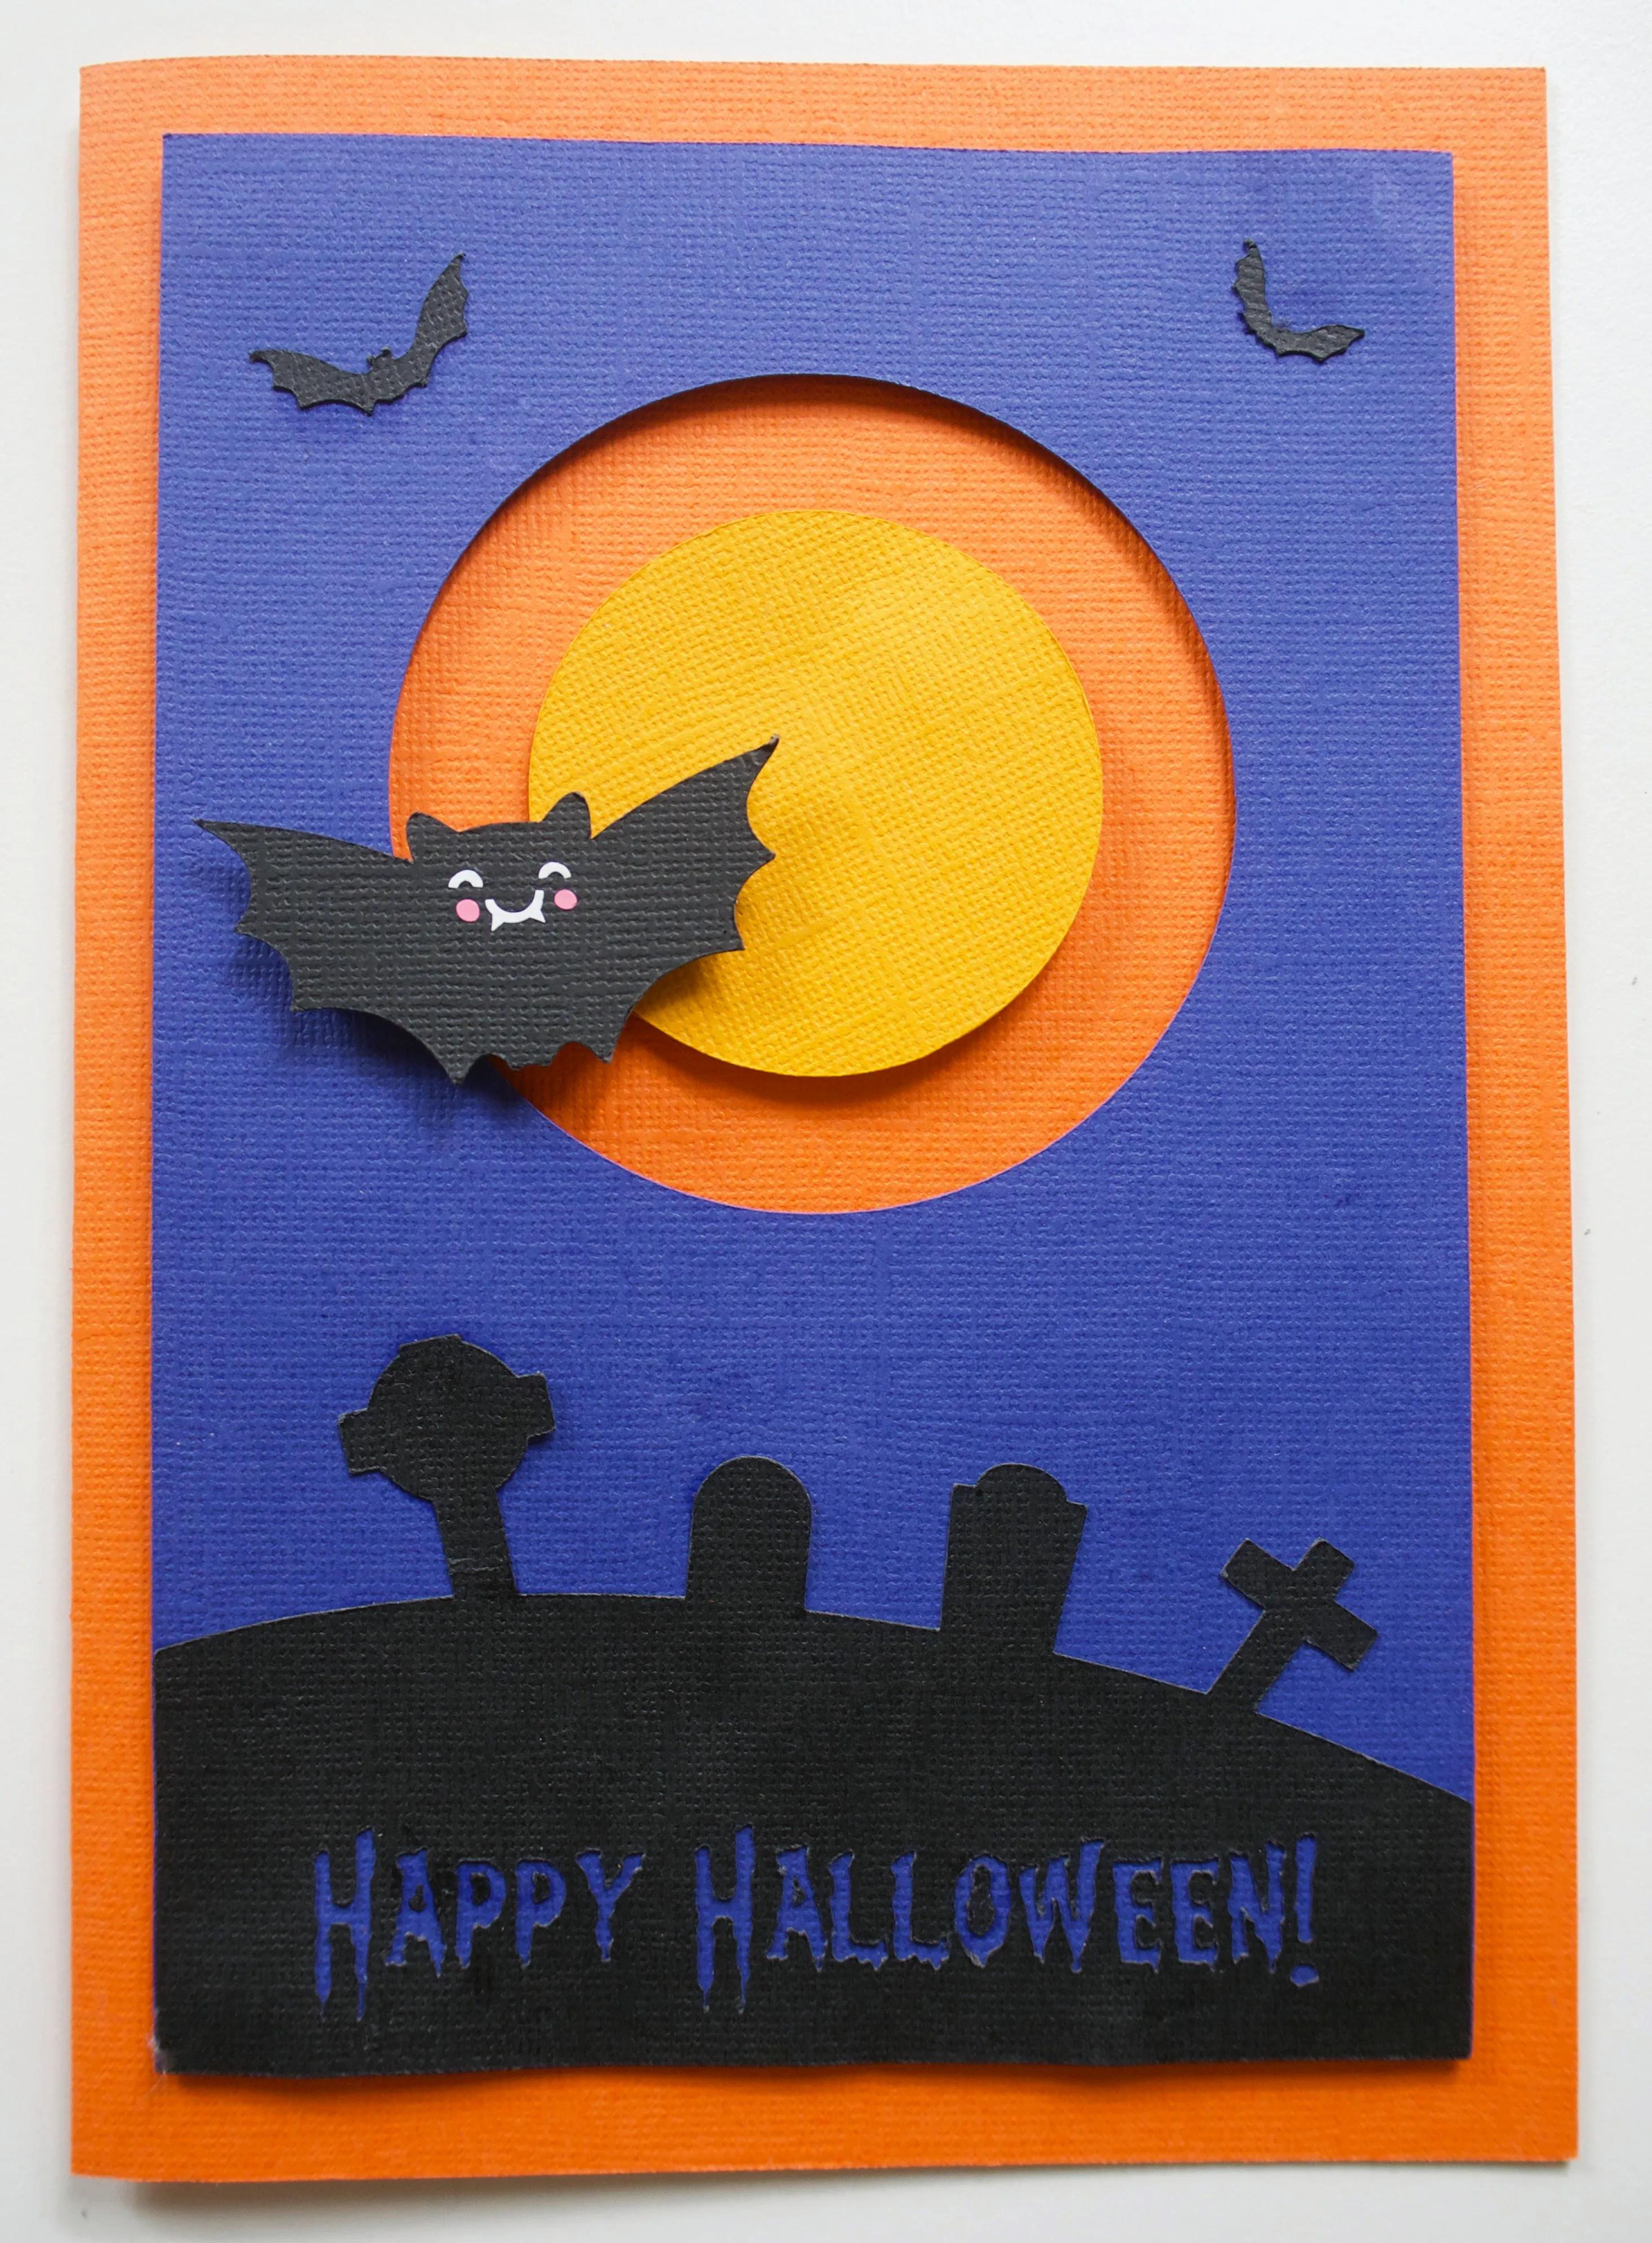 Making a Halloween Spinner Card (with Bat!) on the Cricut – FREE SVG ...